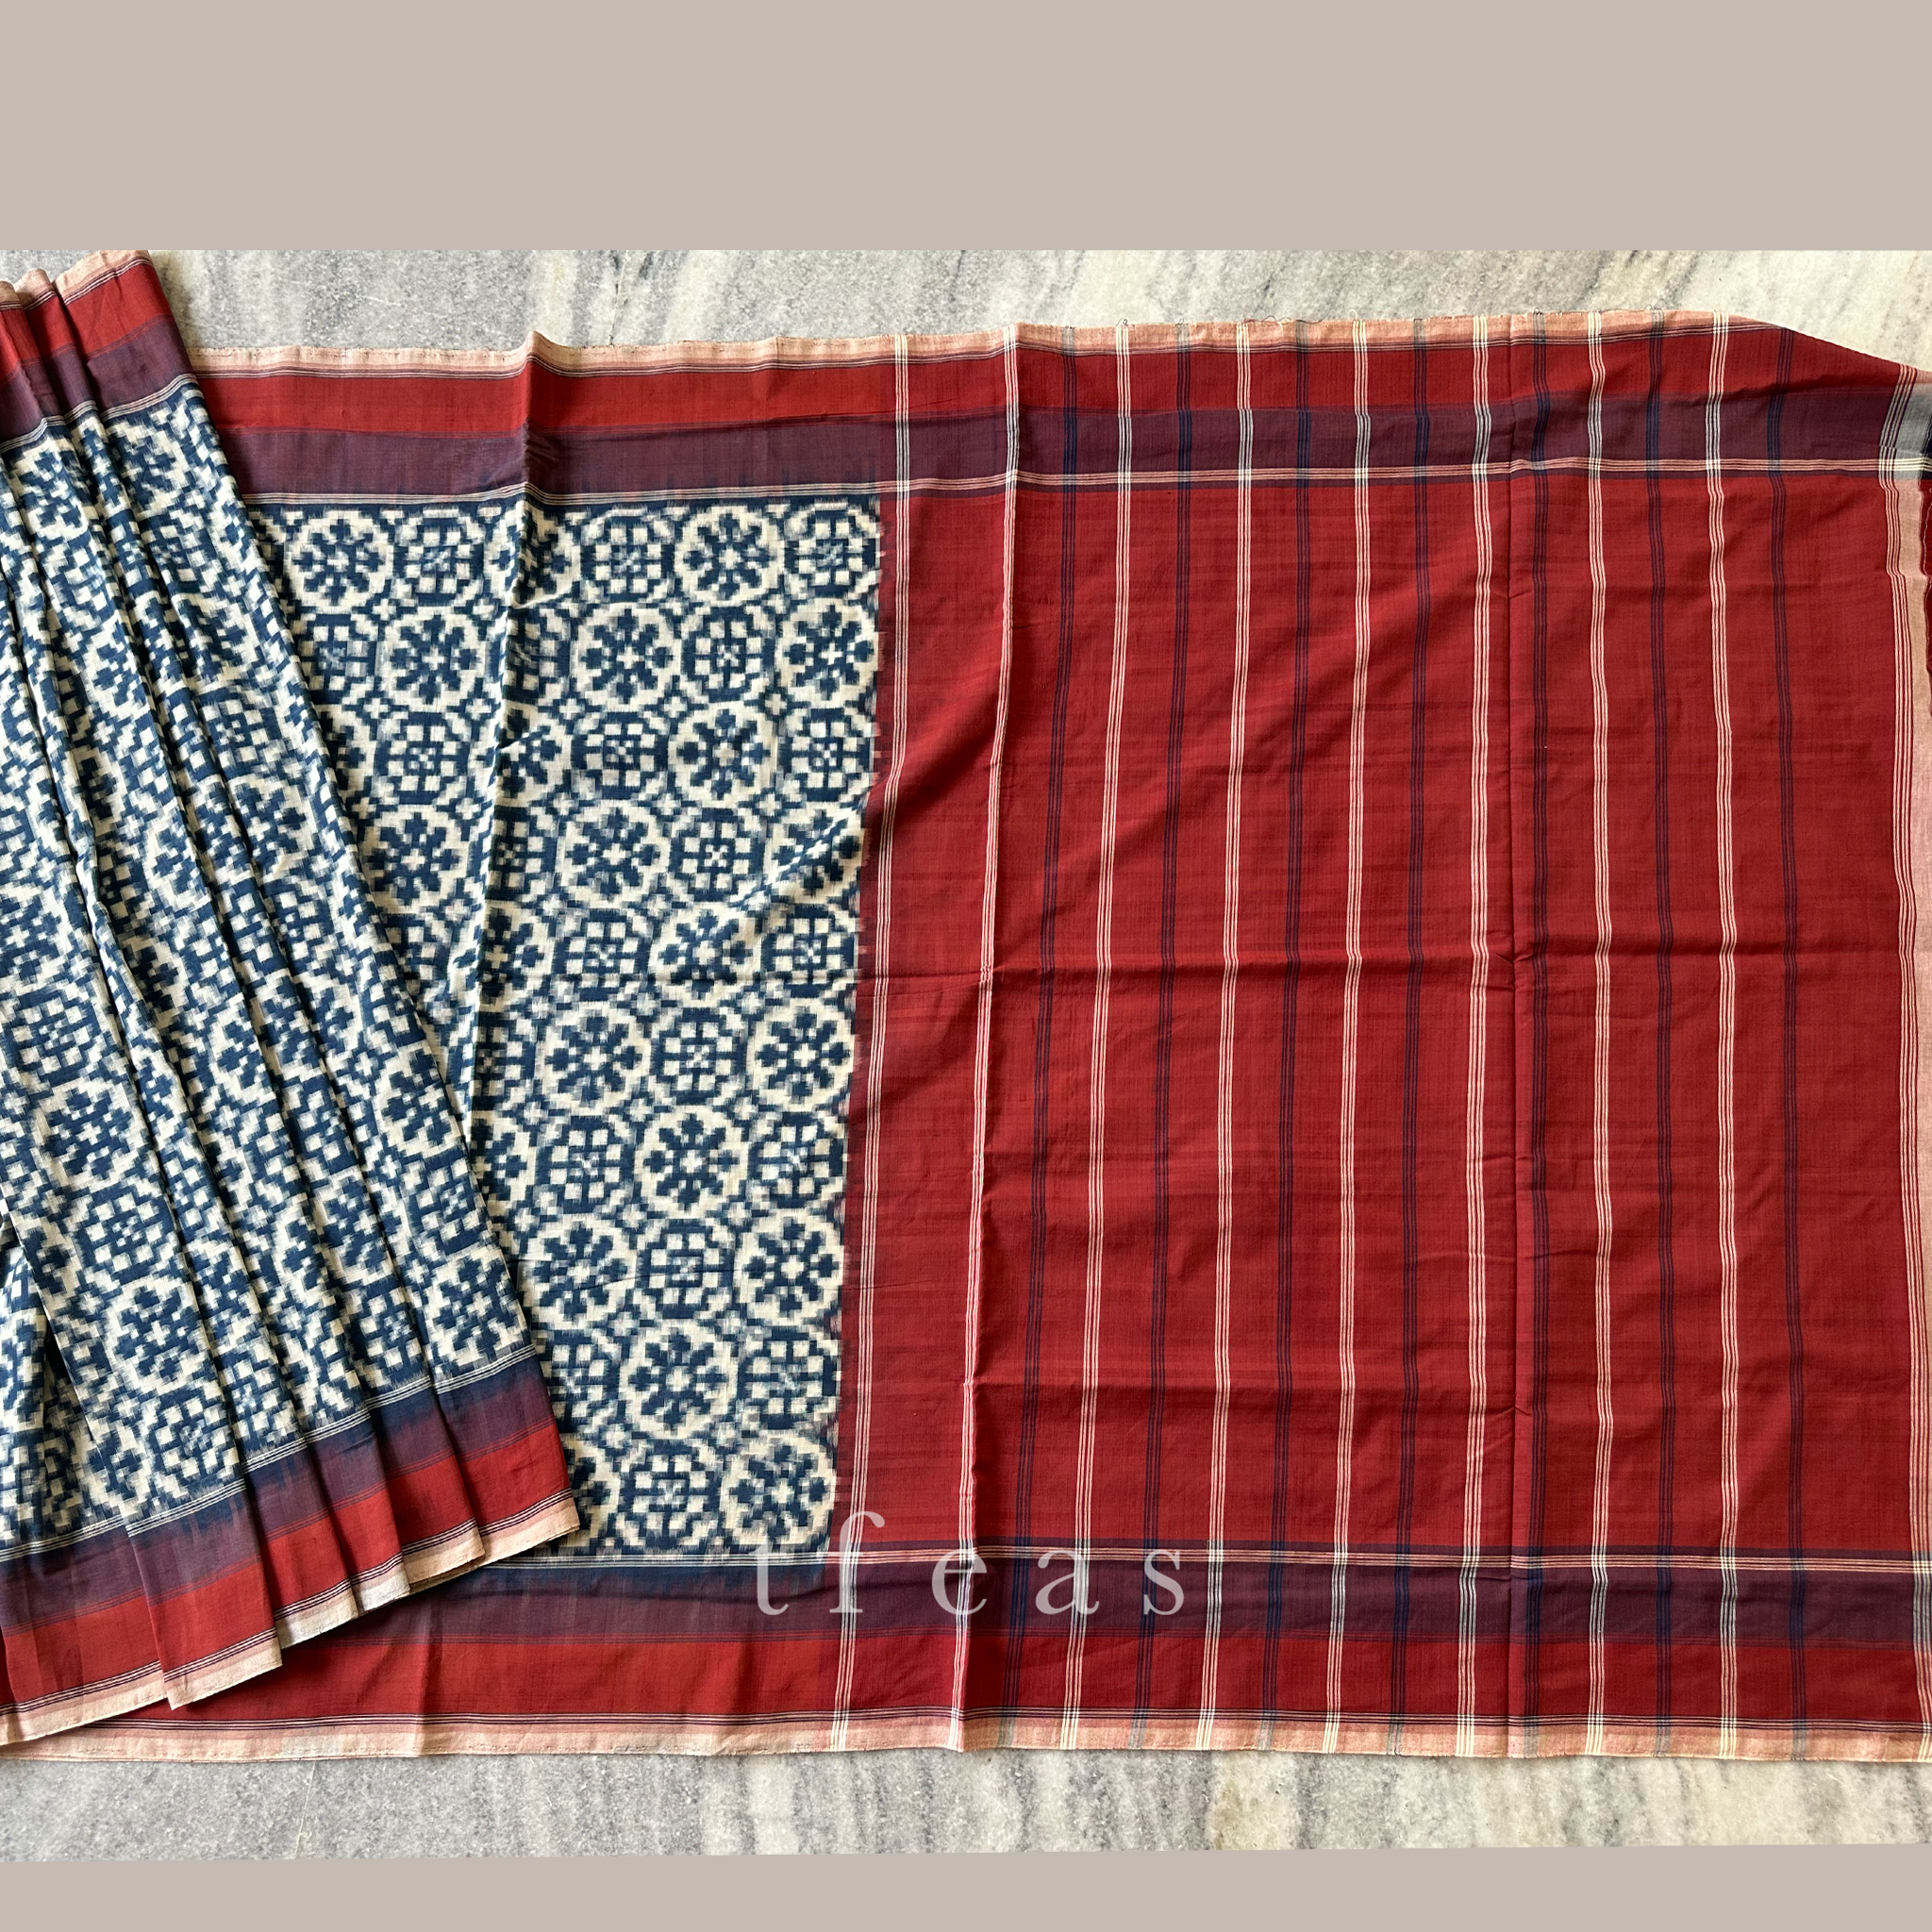 Indigo and Red Natural Dyed Double Ikat